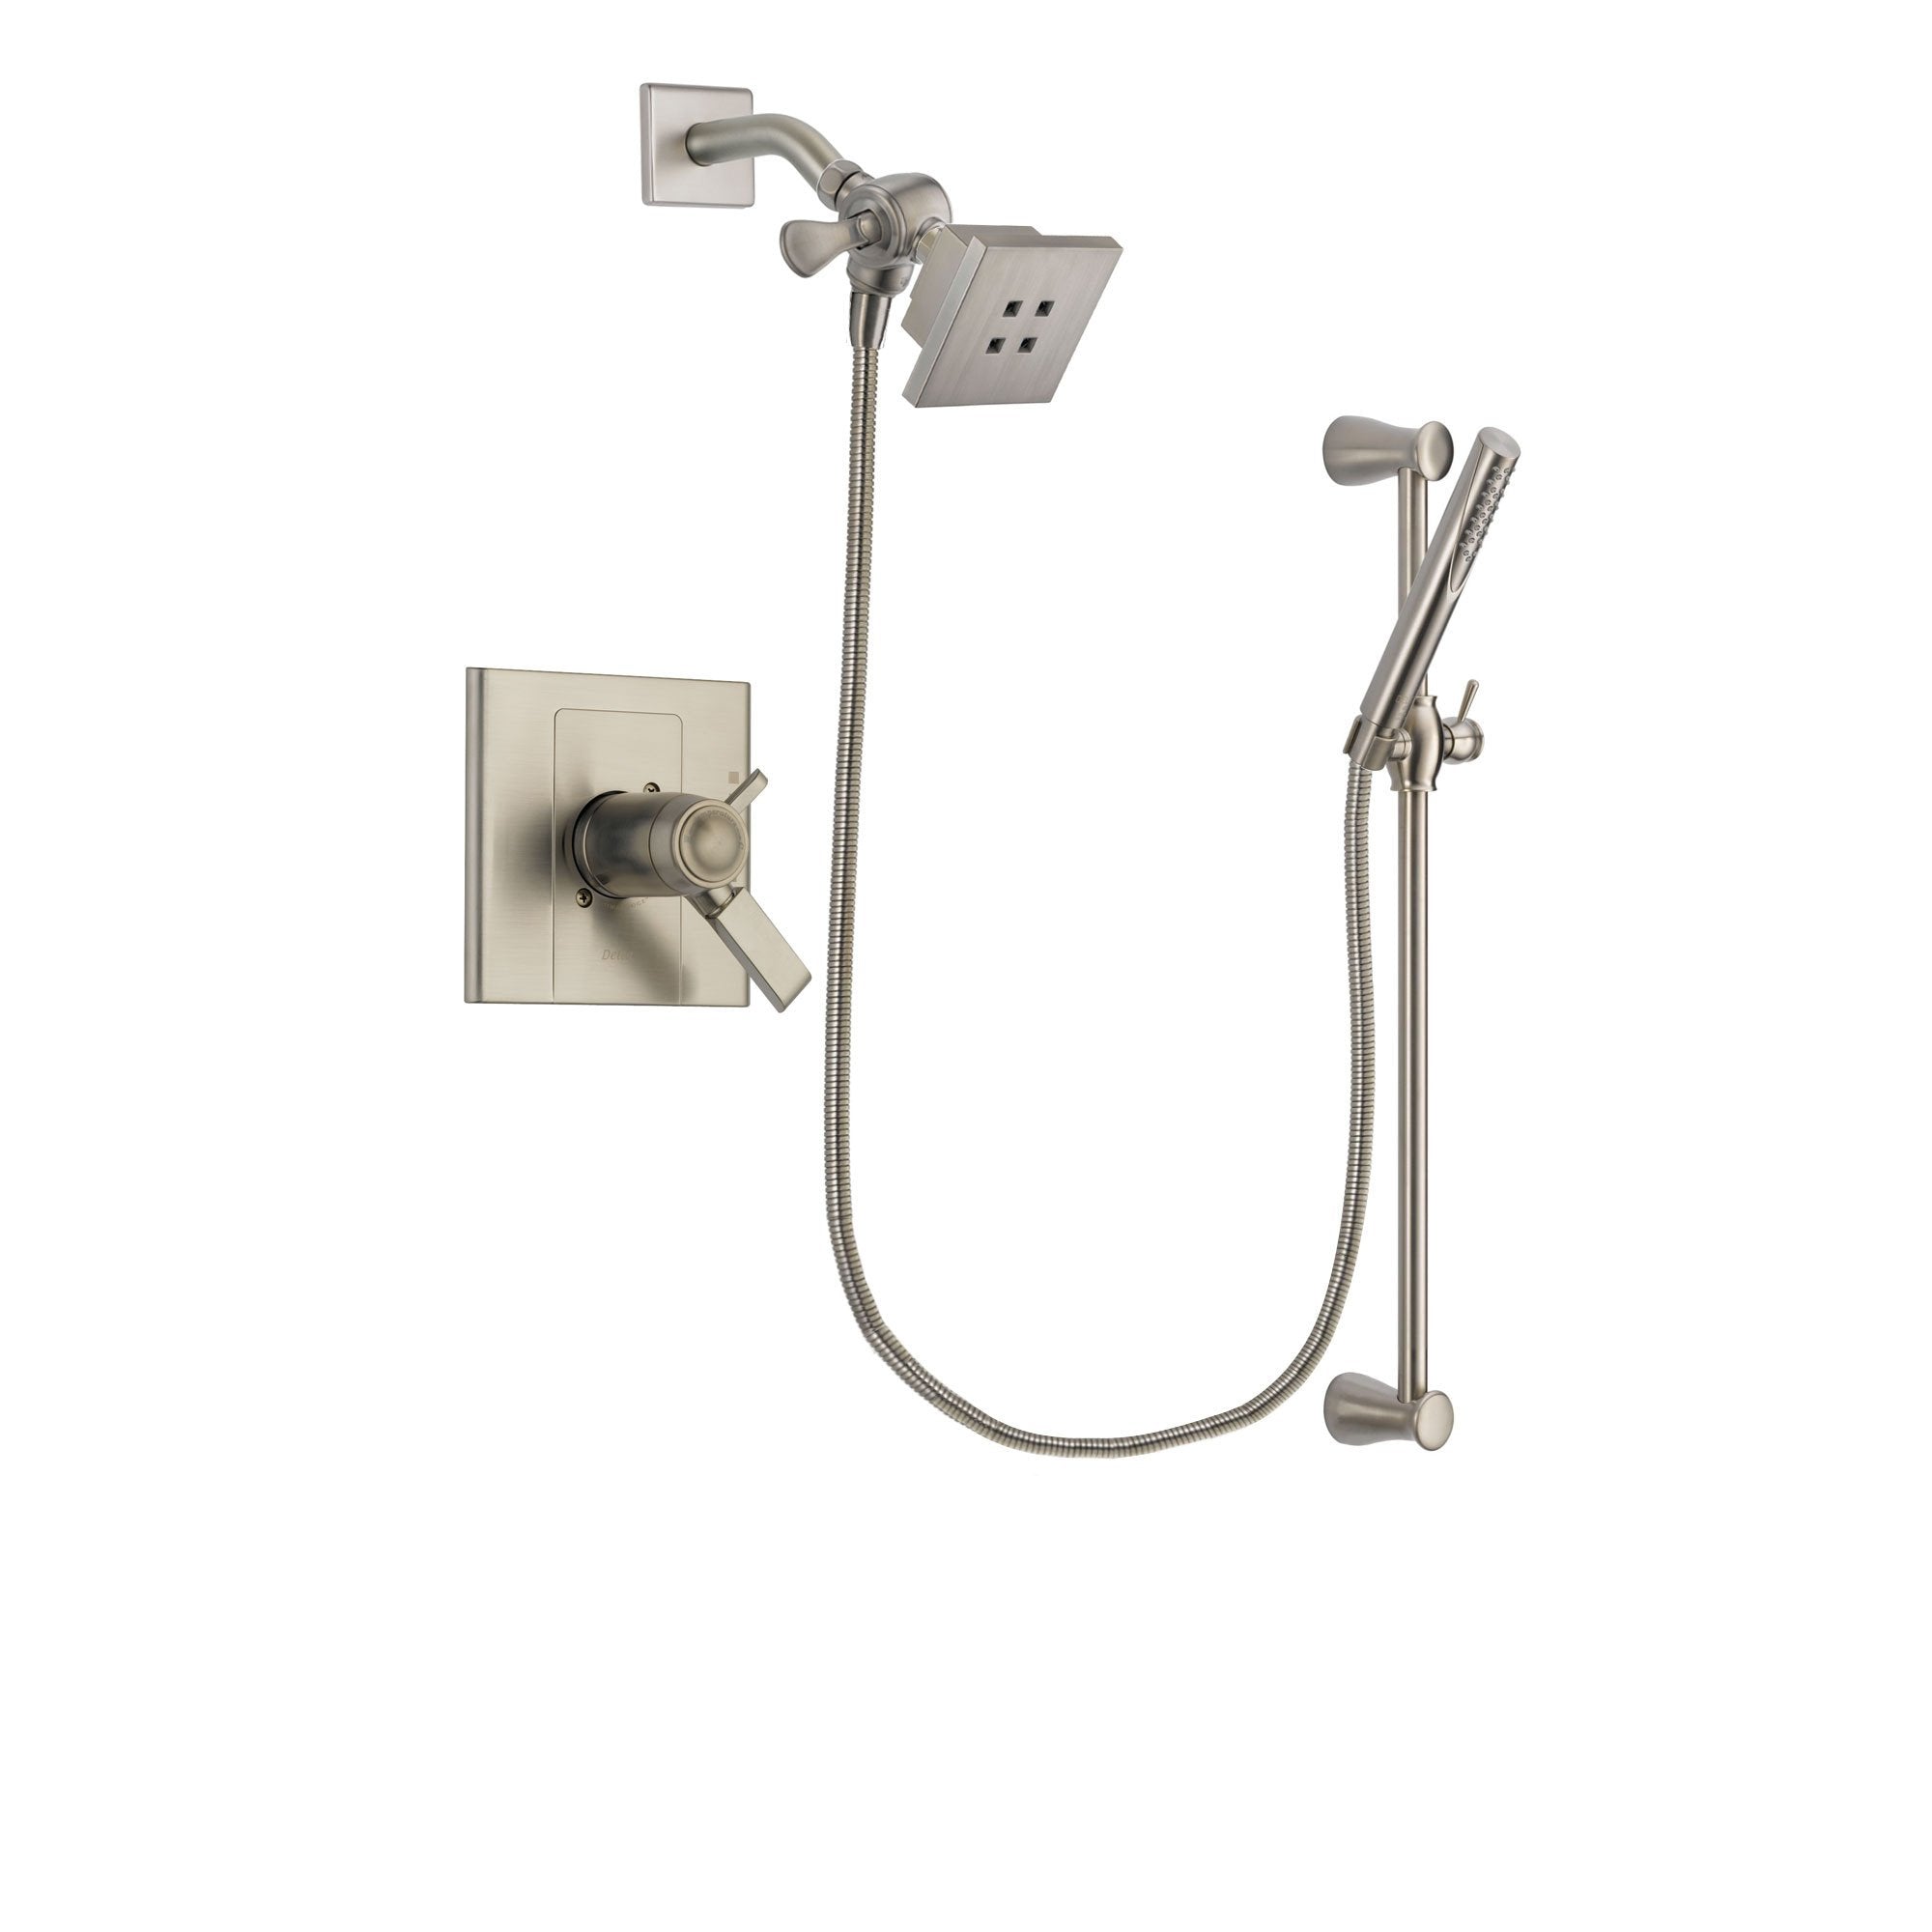 Delta Arzo Stainless Steel Finish Thermostatic Shower Faucet System Package with Square Showerhead and Handheld Shower Spray with Slide Bar Includes Rough-in Valve DSP2278V